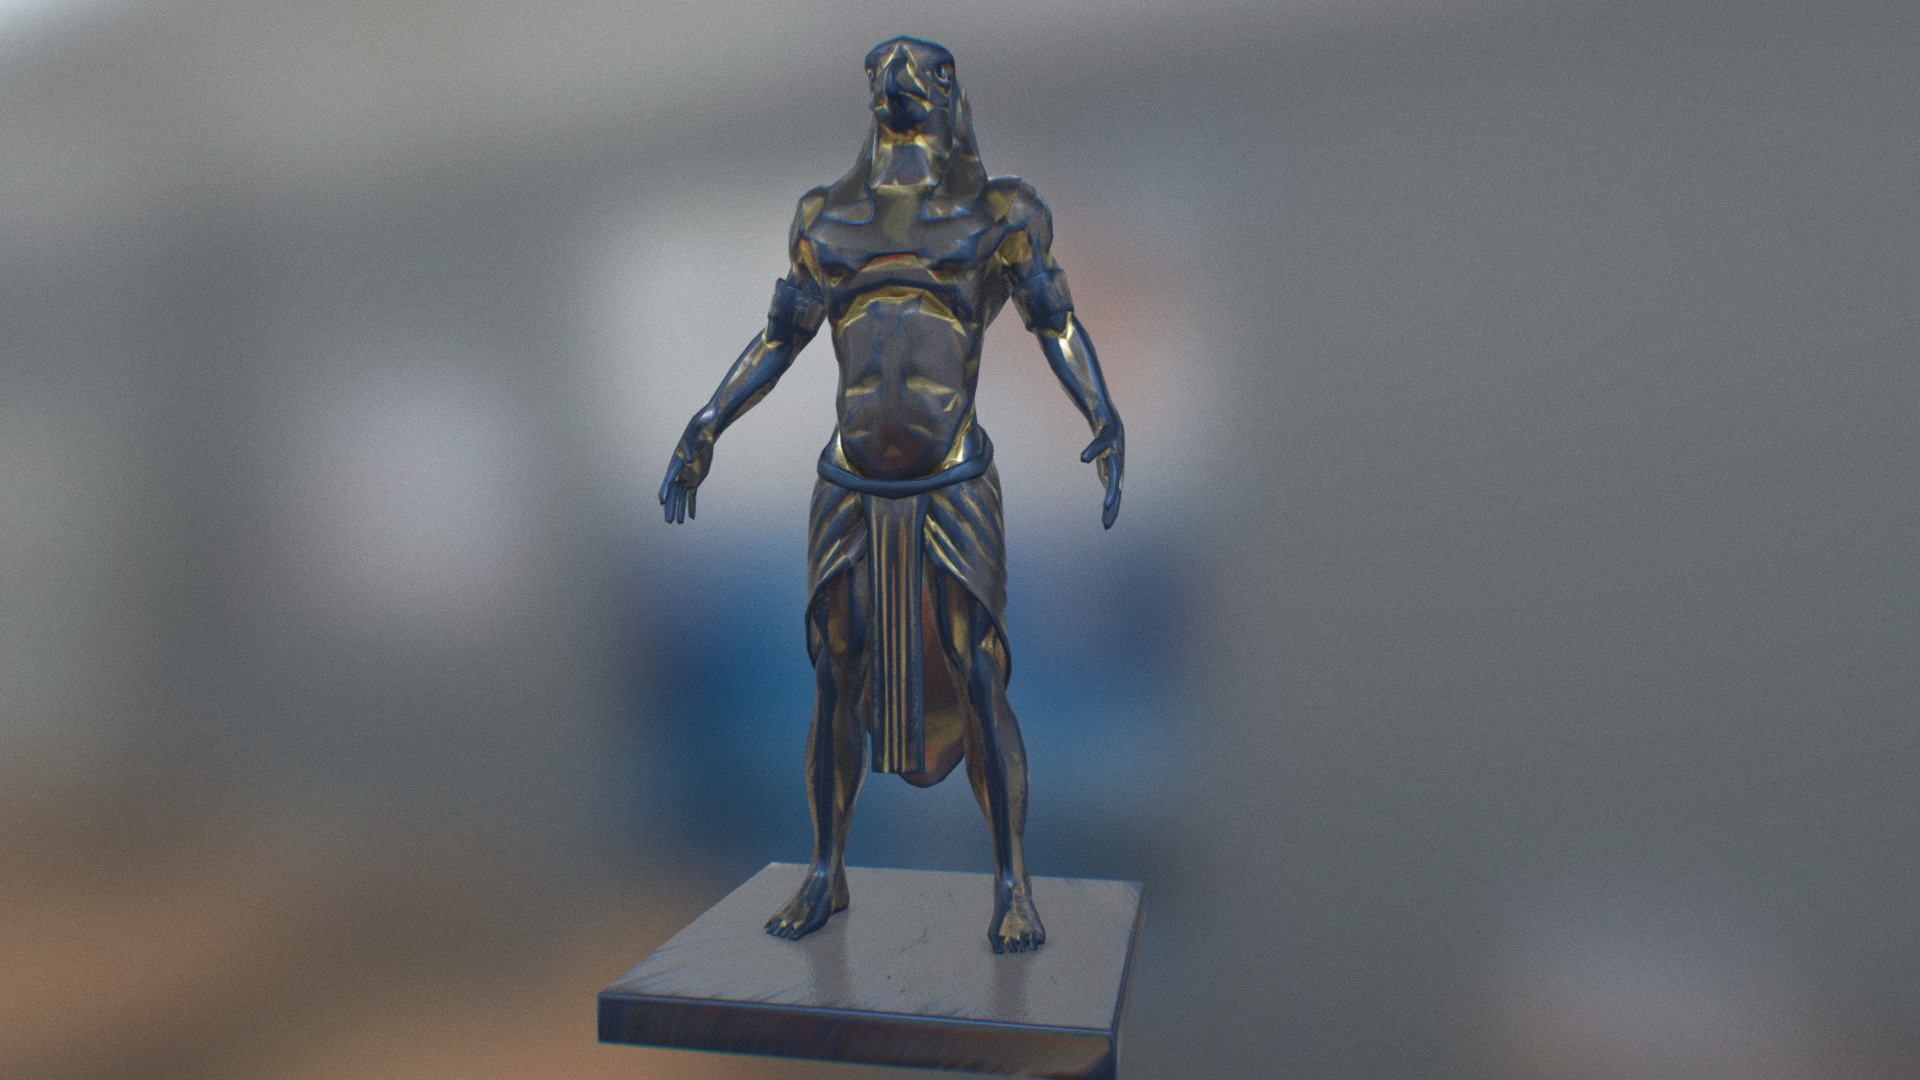 3D model Pharaoh - This is a 3D model of the Pharaoh. The 3D model is about a statue of a person.